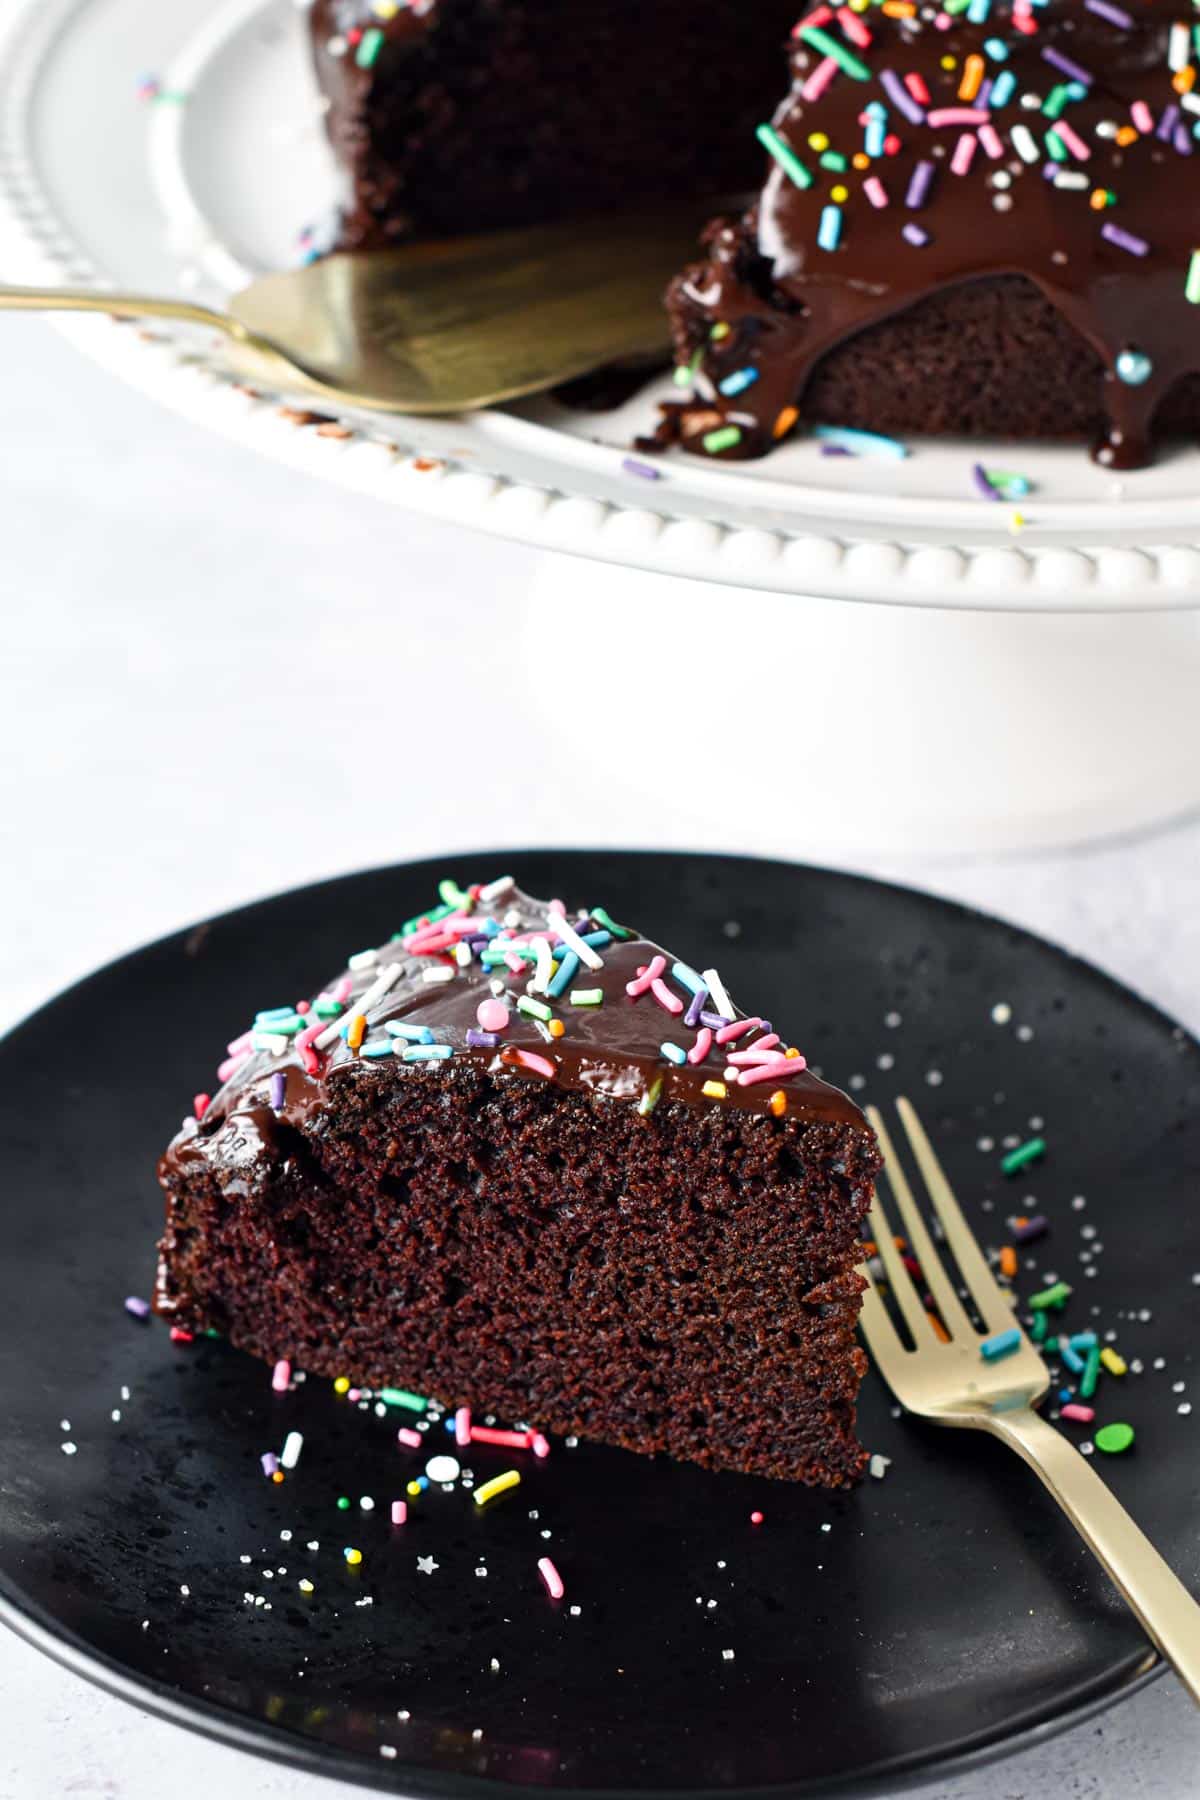 This Eggless Cake recipe is an easy one-bowl egg-free chocolate cake recipe with the most delicious moist cake crumb. Plus, the cake is also dairy-free and vegan approved.This Eggless Cake recipe is an easy one-bowl egg-free chocolate cake recipe with the most delicious moist cake crumb. Plus, the cake is also dairy-free and vegan approved.